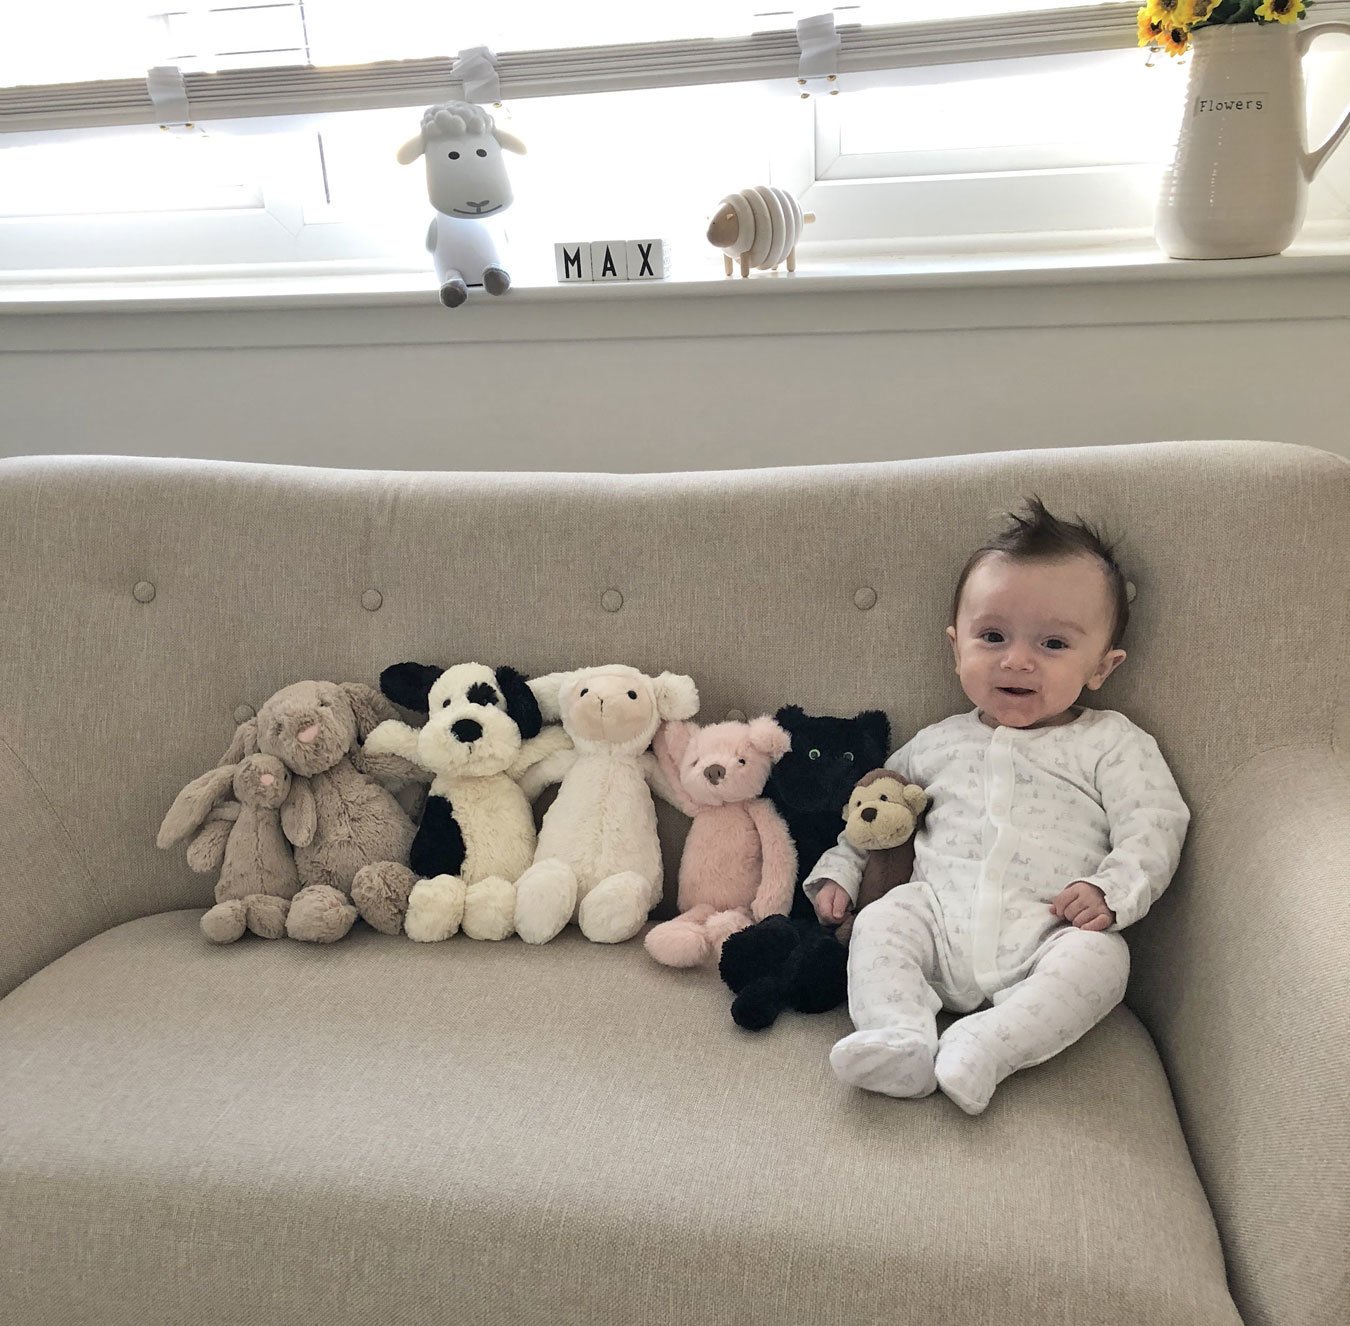 Max's Jellycat collection